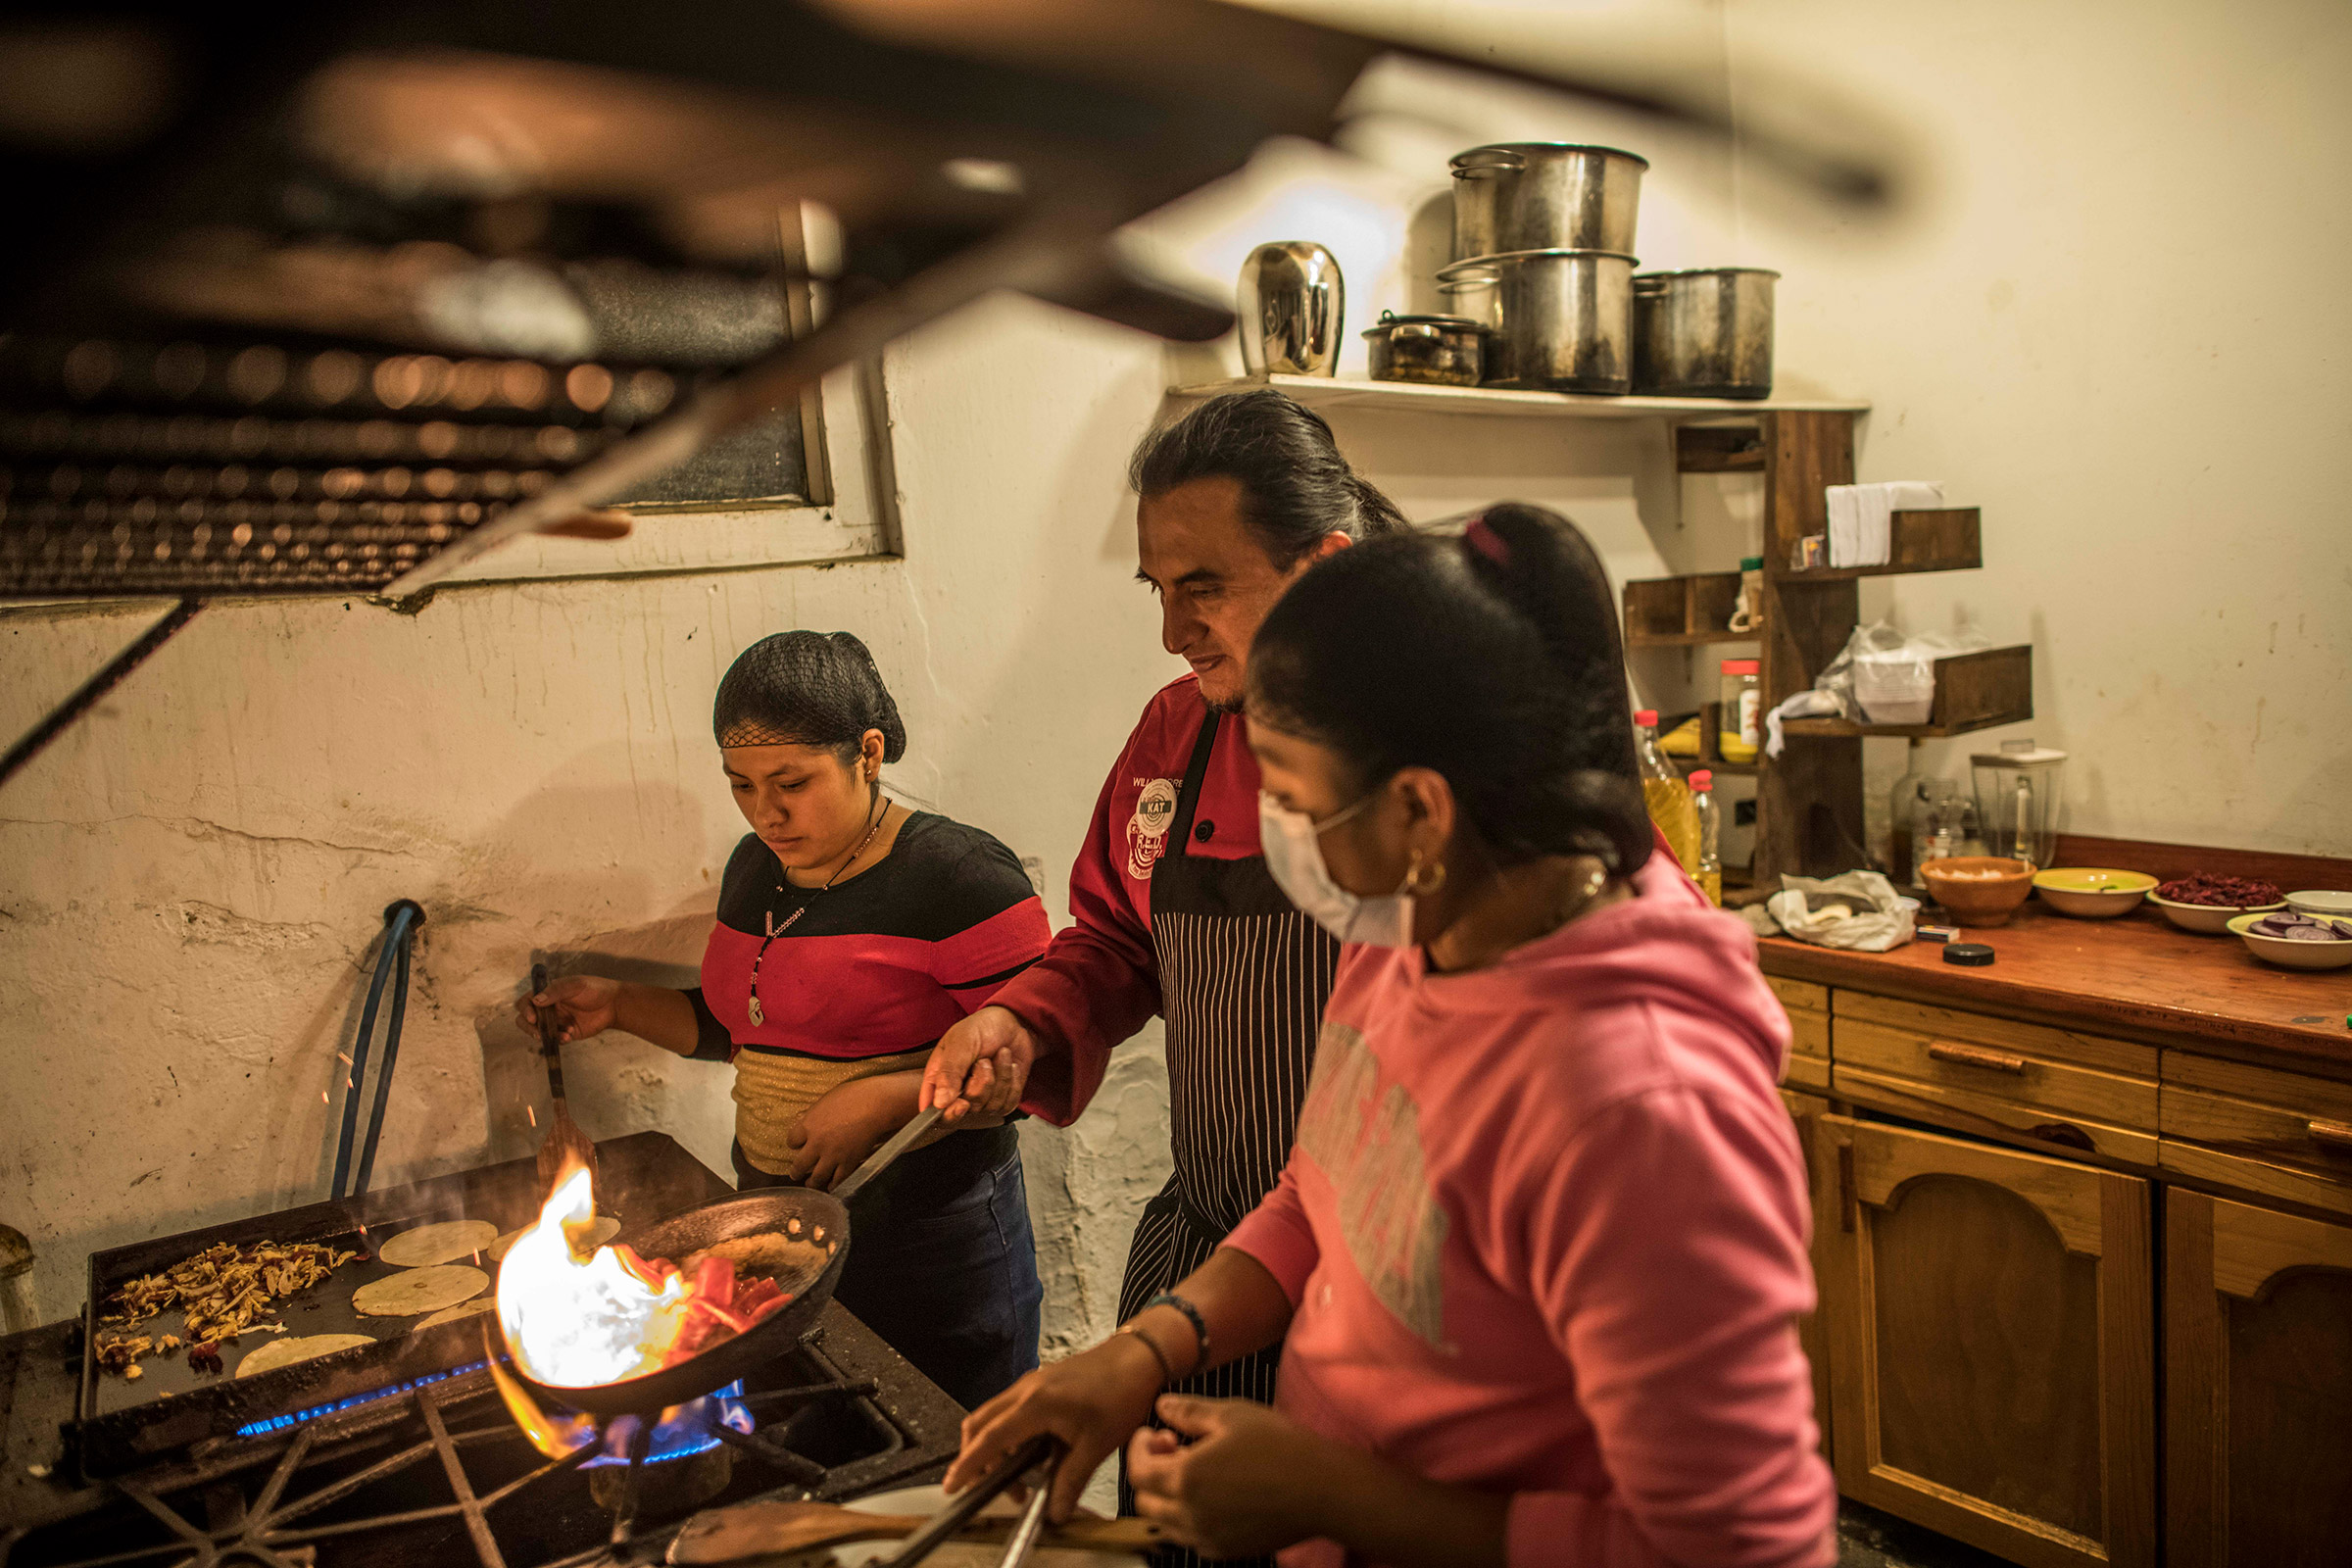 Willy Barreno (red shirt) leading the kitchen of La Red.Quetzaltenango, Quetzaltenango, Guatemala. April 8, 2022.Willy Barreno, 49, after spent 14 years in the US, between 1996 and 2010, as a regular migrant, decided to come back in his born land, Guatemala. After got experience as cook in New Mexico and back in Quetzaltenango, he opened his own place, La Red, serving Mexican dishes infused with Guatemalan flavors and ingredients. He dreamed of usingselling produce from local farmers and employing other returned migrants. But today La Red is hanging by a thread. Barrenos says he relies on donations from friends and family to keep it open week to week.